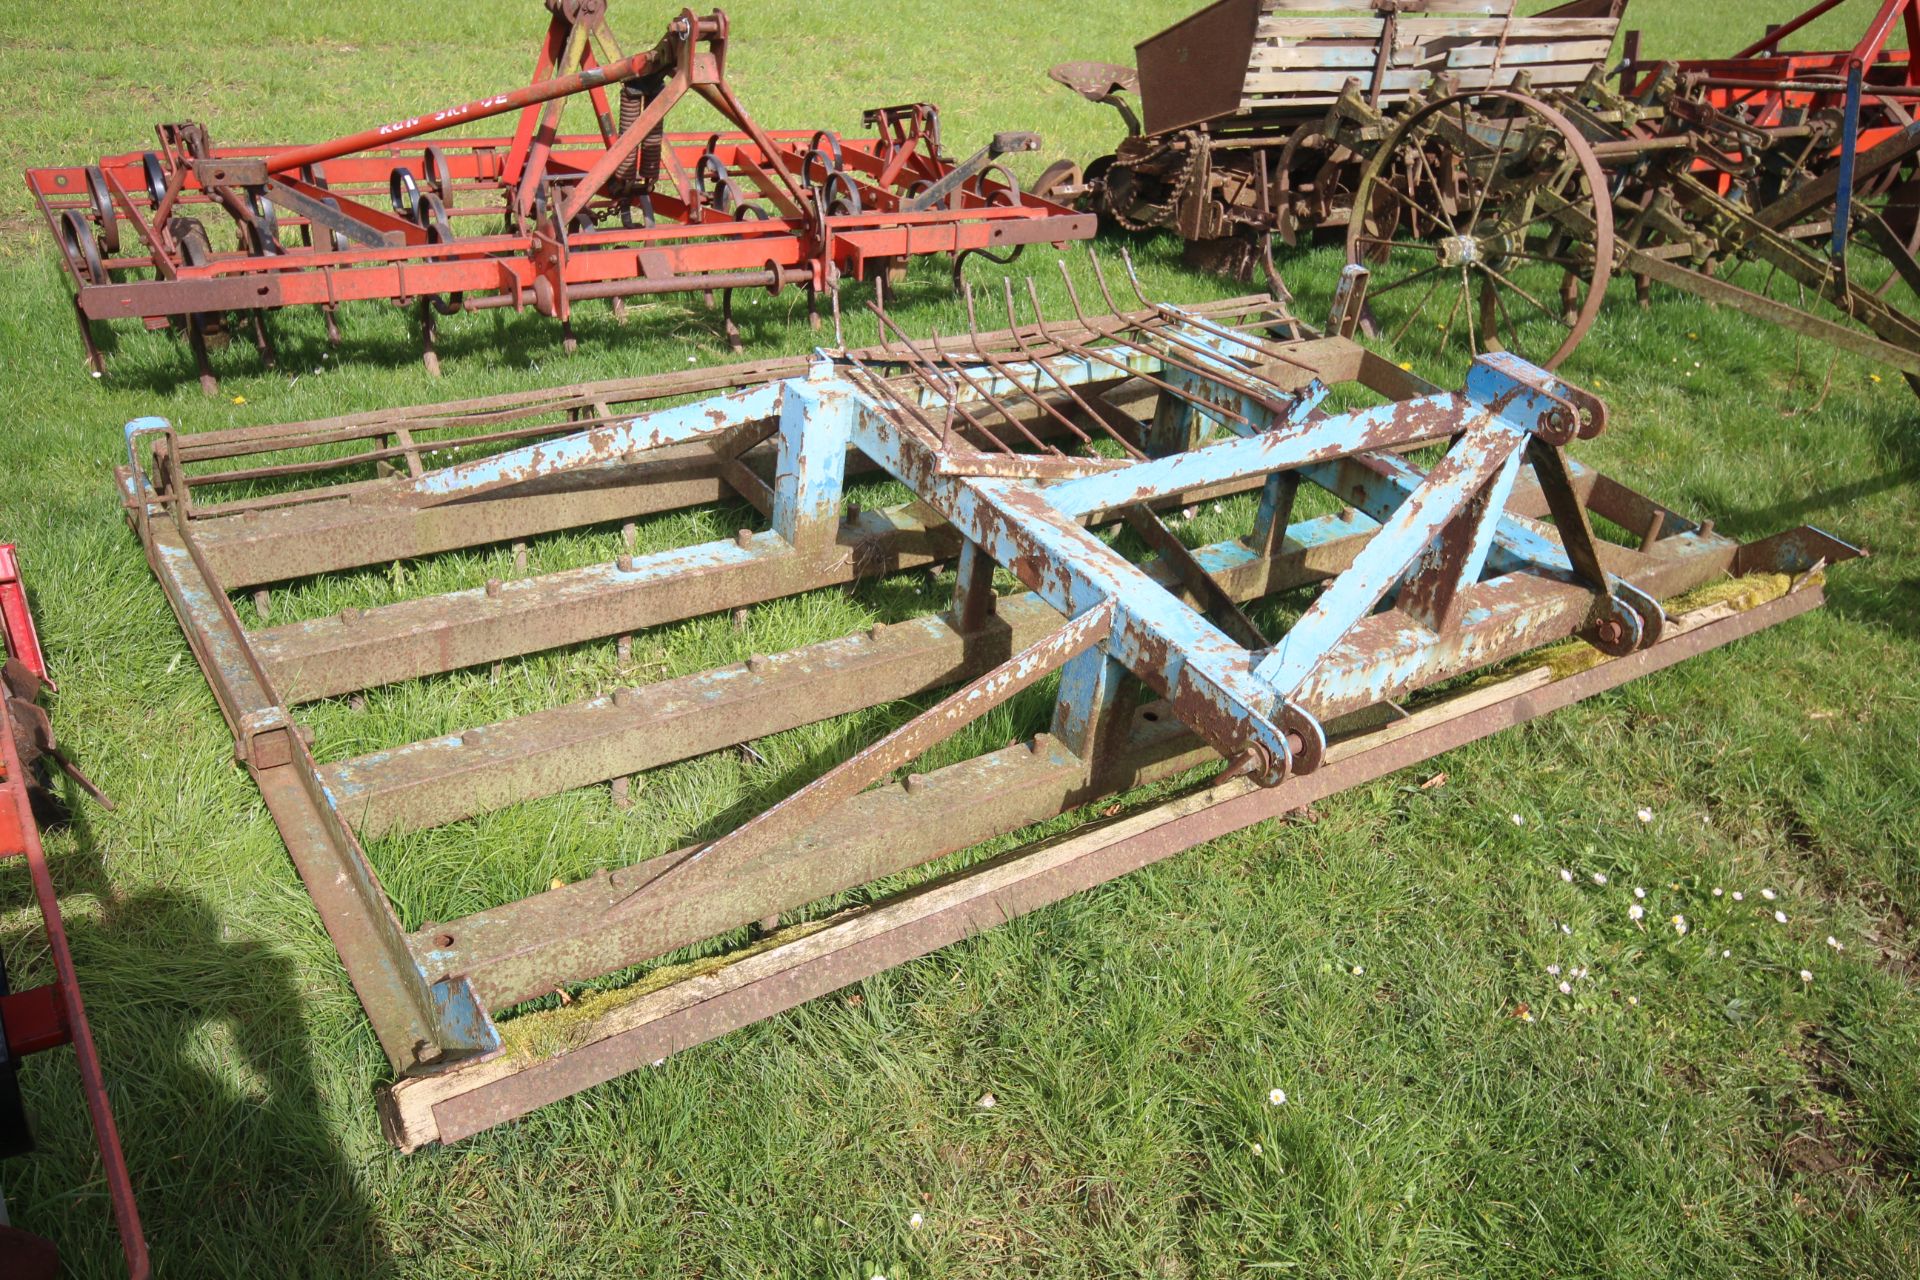 A W Smith & Sons Dutch harrow. For sale due to retirement. V